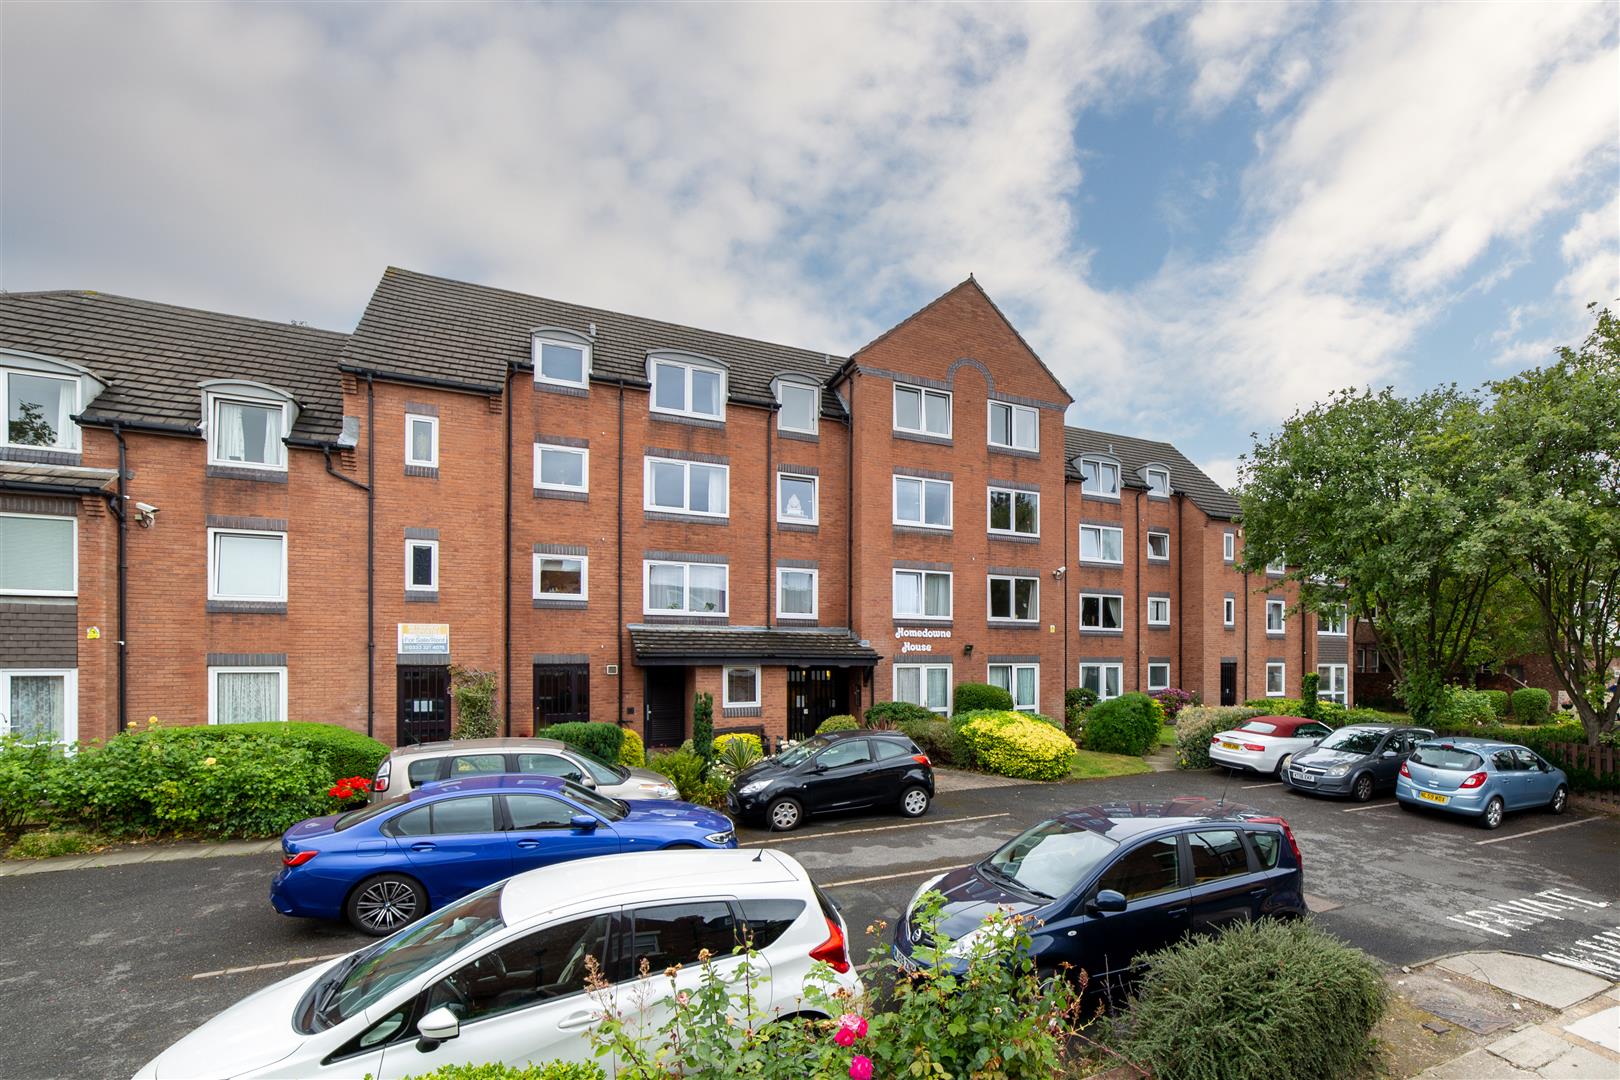 1 bed apartment for sale in High Street, Newcastle Upon Tyne, NE3 